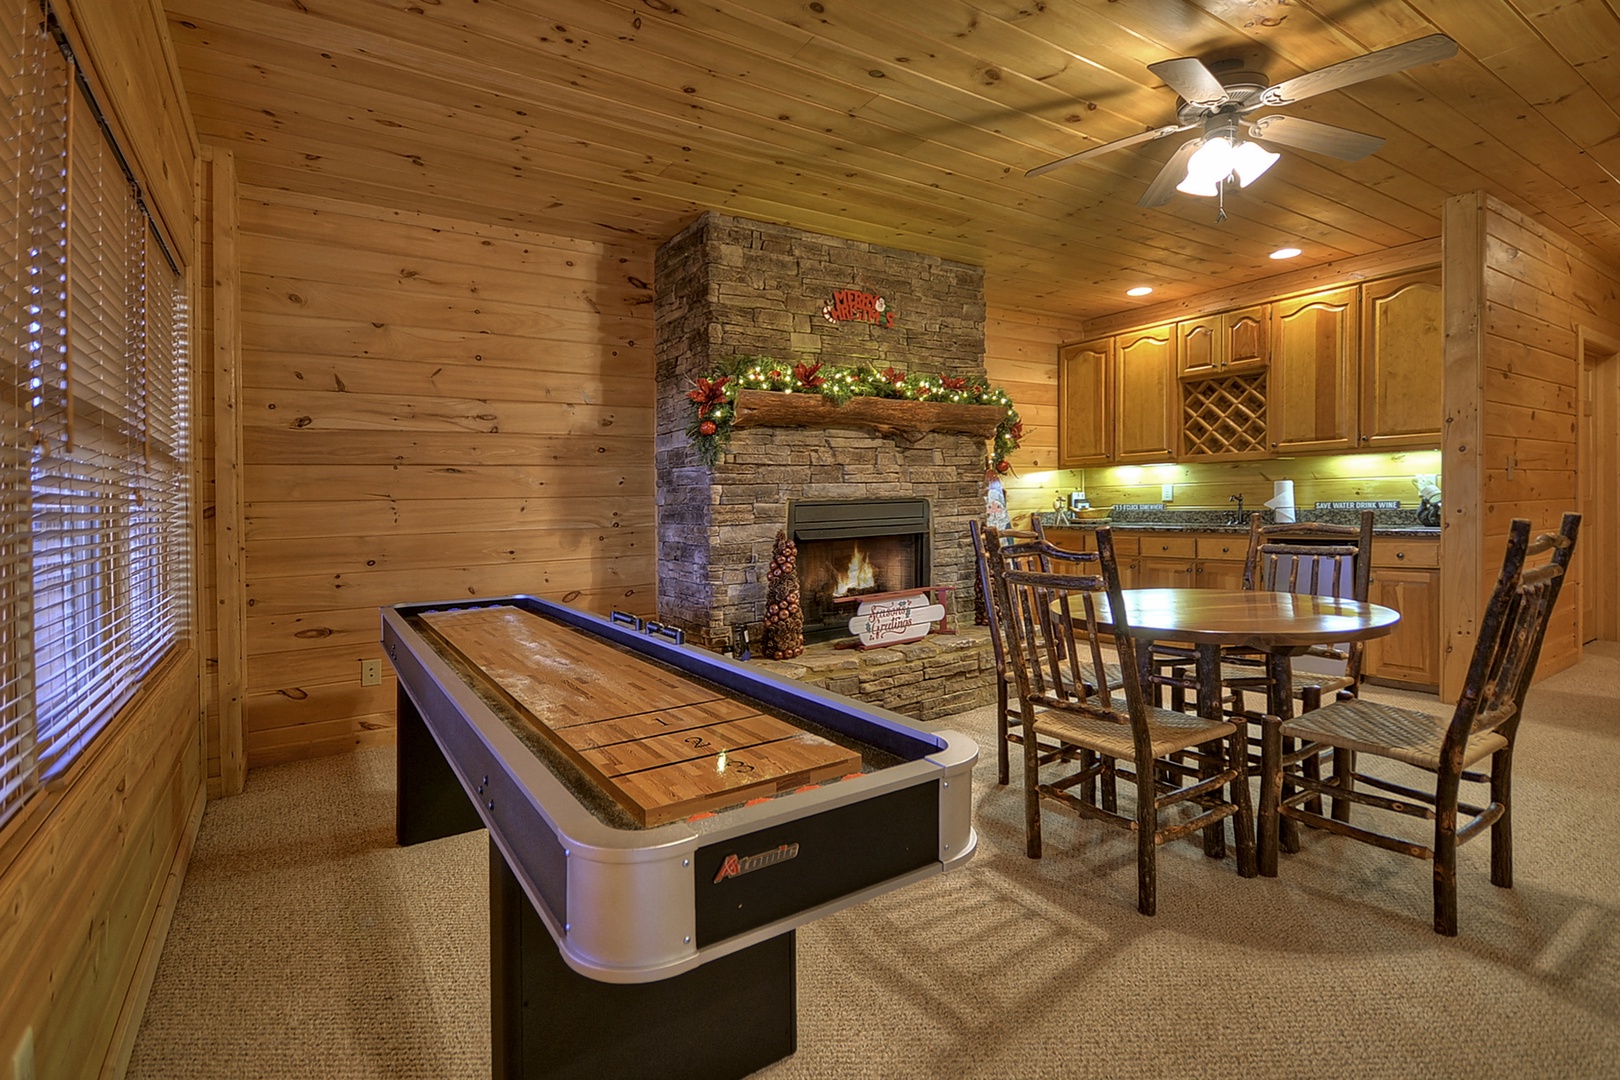 Bearcat Lodge- Lower level area with shuffleboard and card table